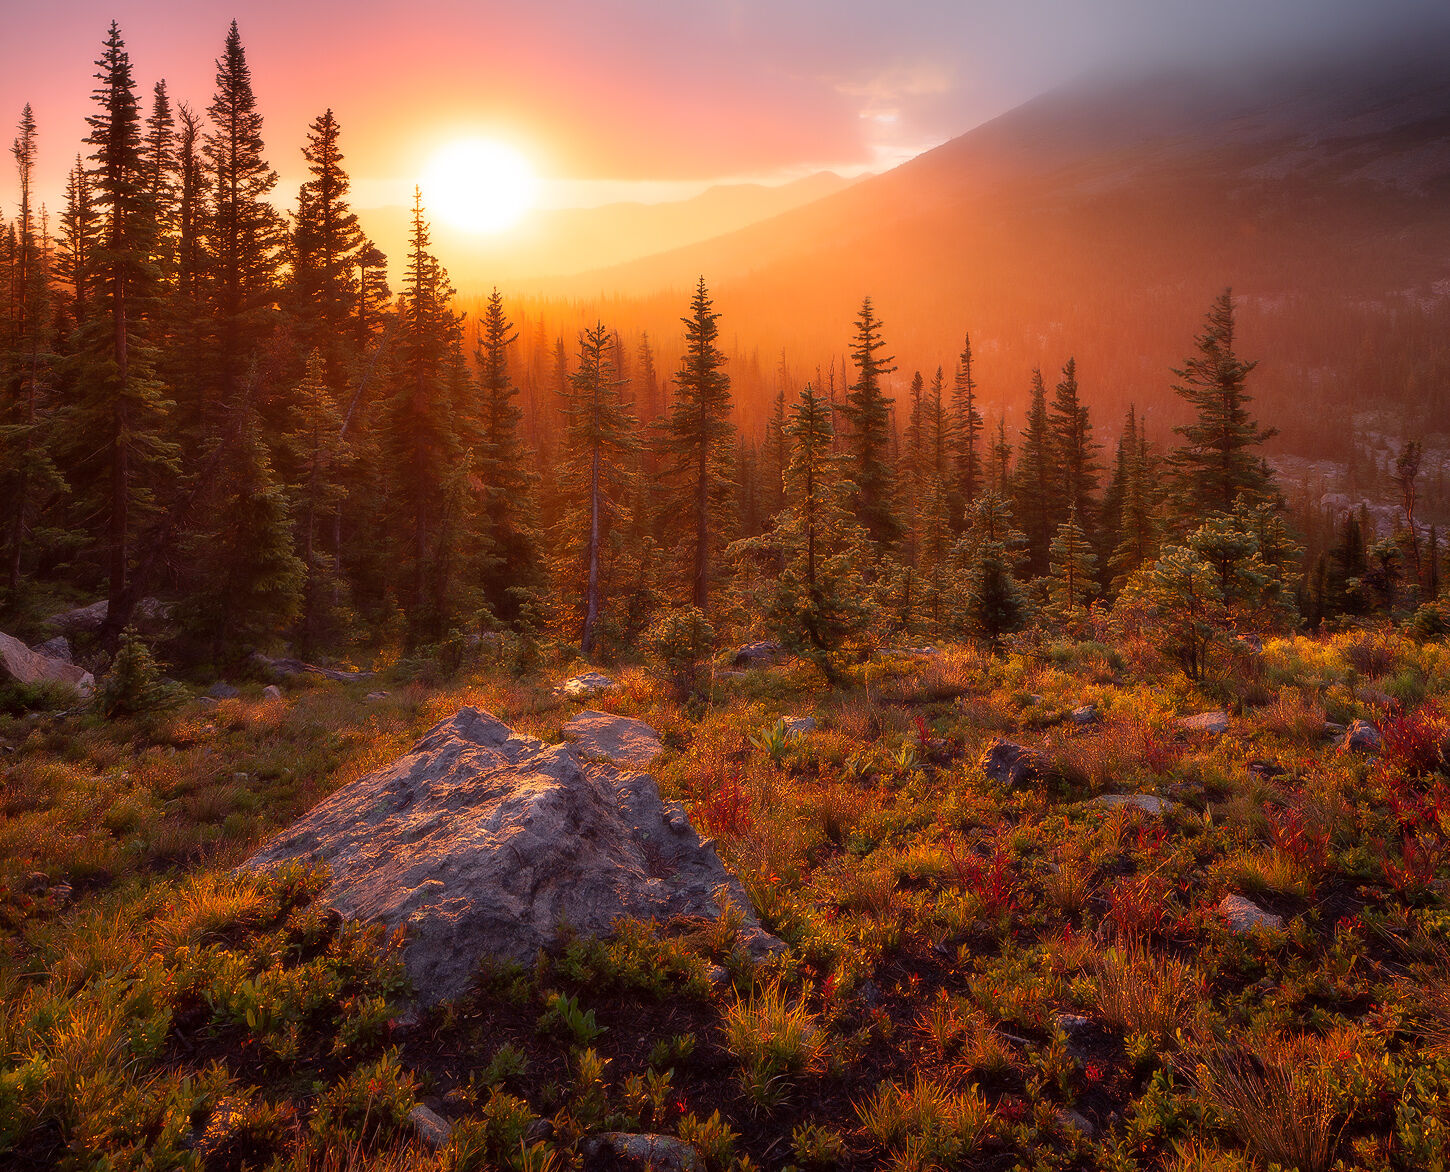 A bright setting sun shines on the spruce forest and grassy hillside casting an orange glow.